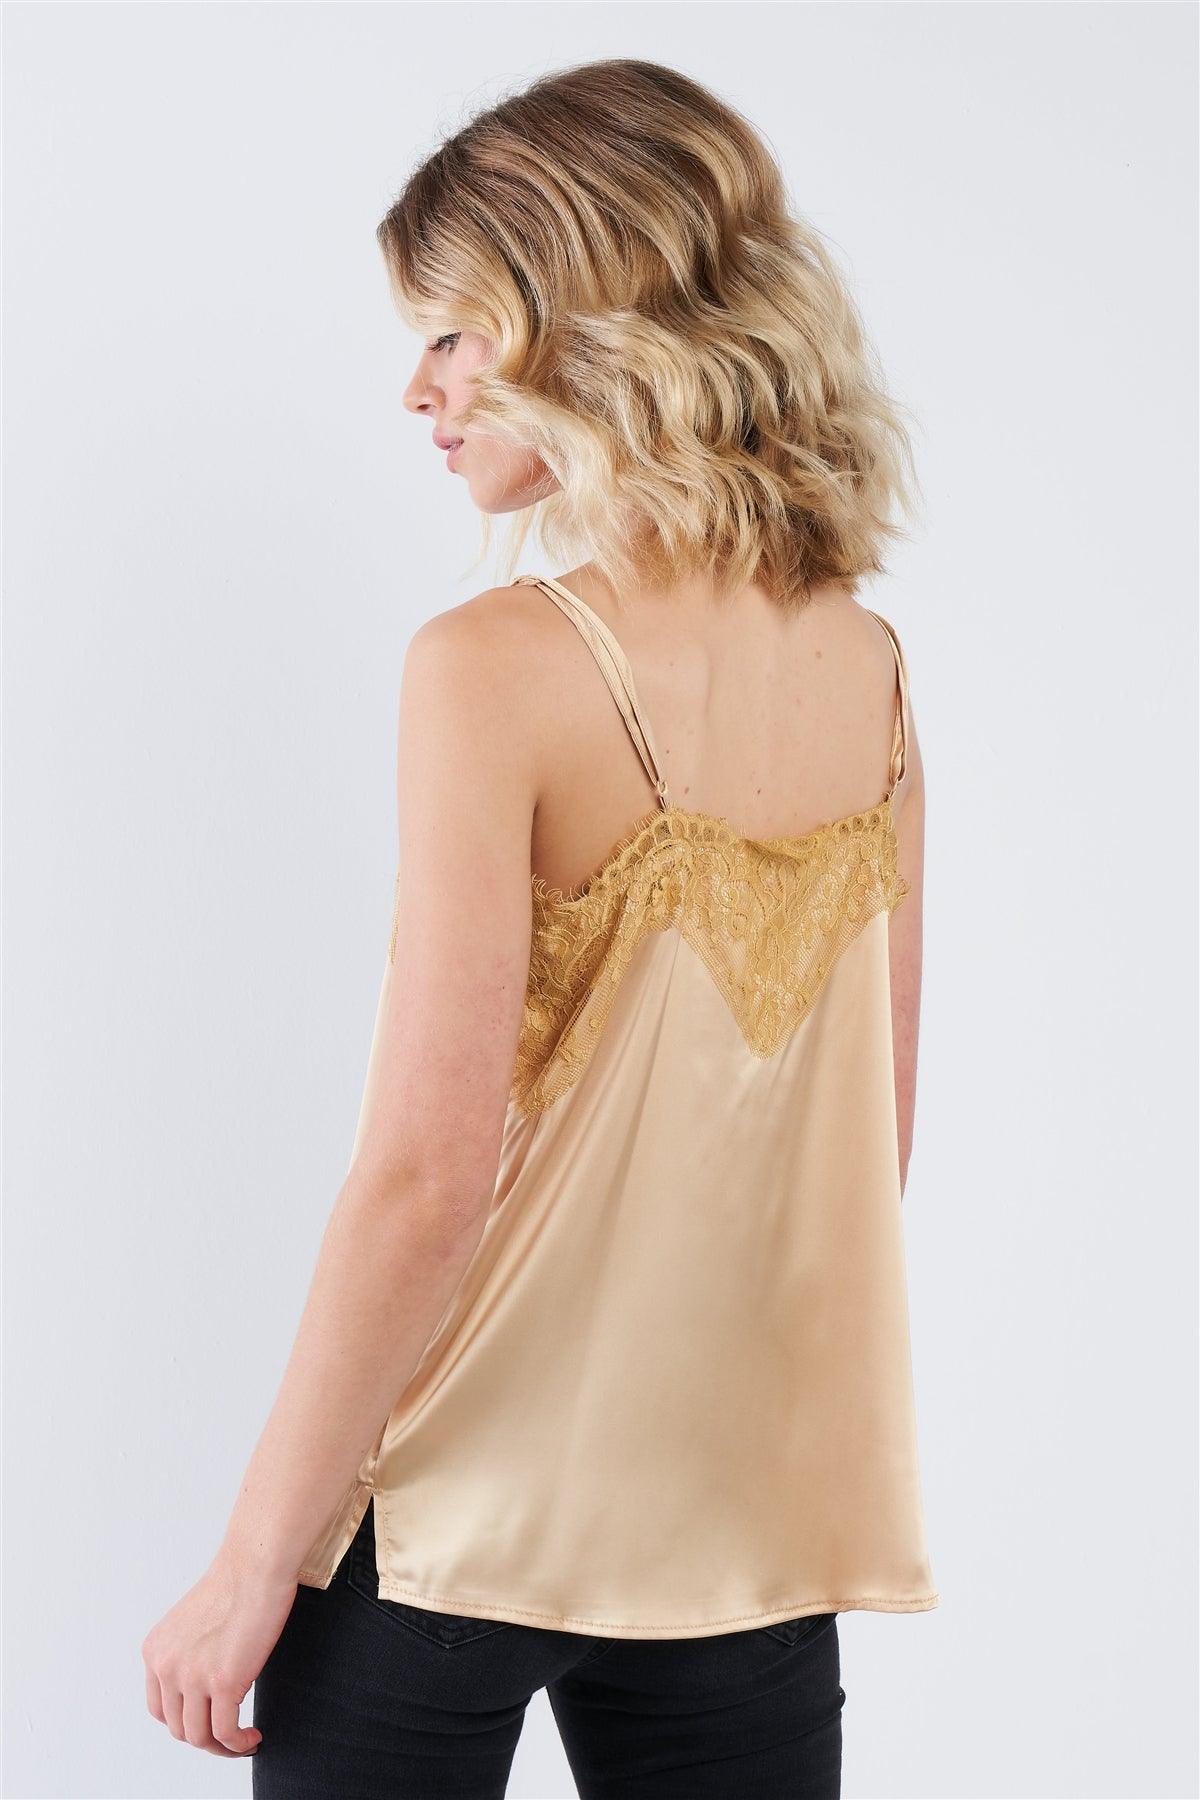 Golden Yellow Satin Lace V-Neck Adjustable Cami Top